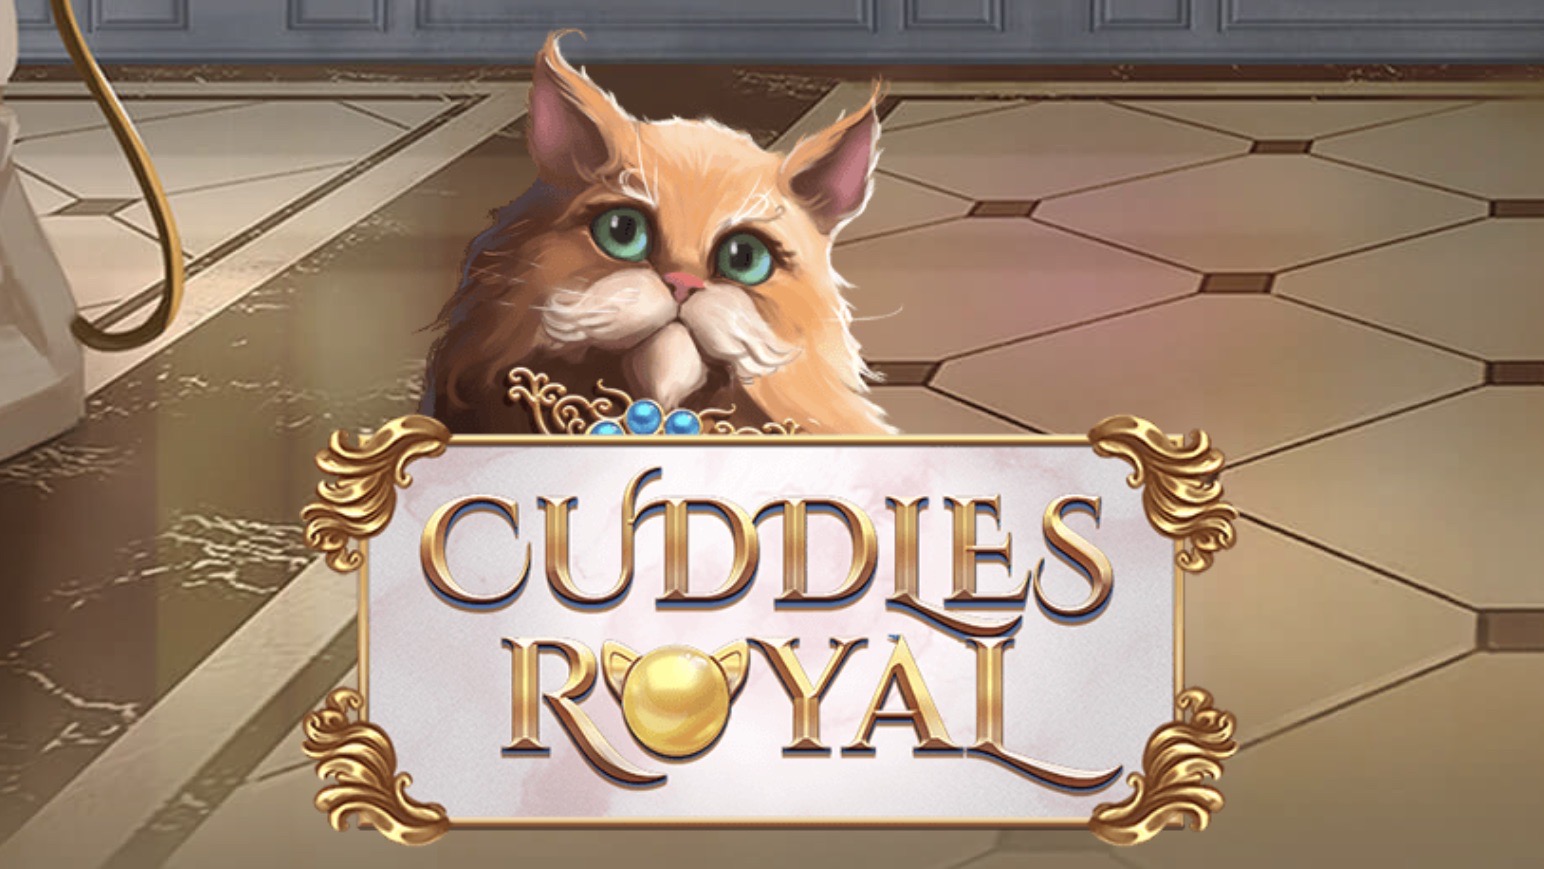 Cuddles Royal is a 5x4, 20-payline video slot that incorporates a maximum win potential of up to x1,200 the bet.